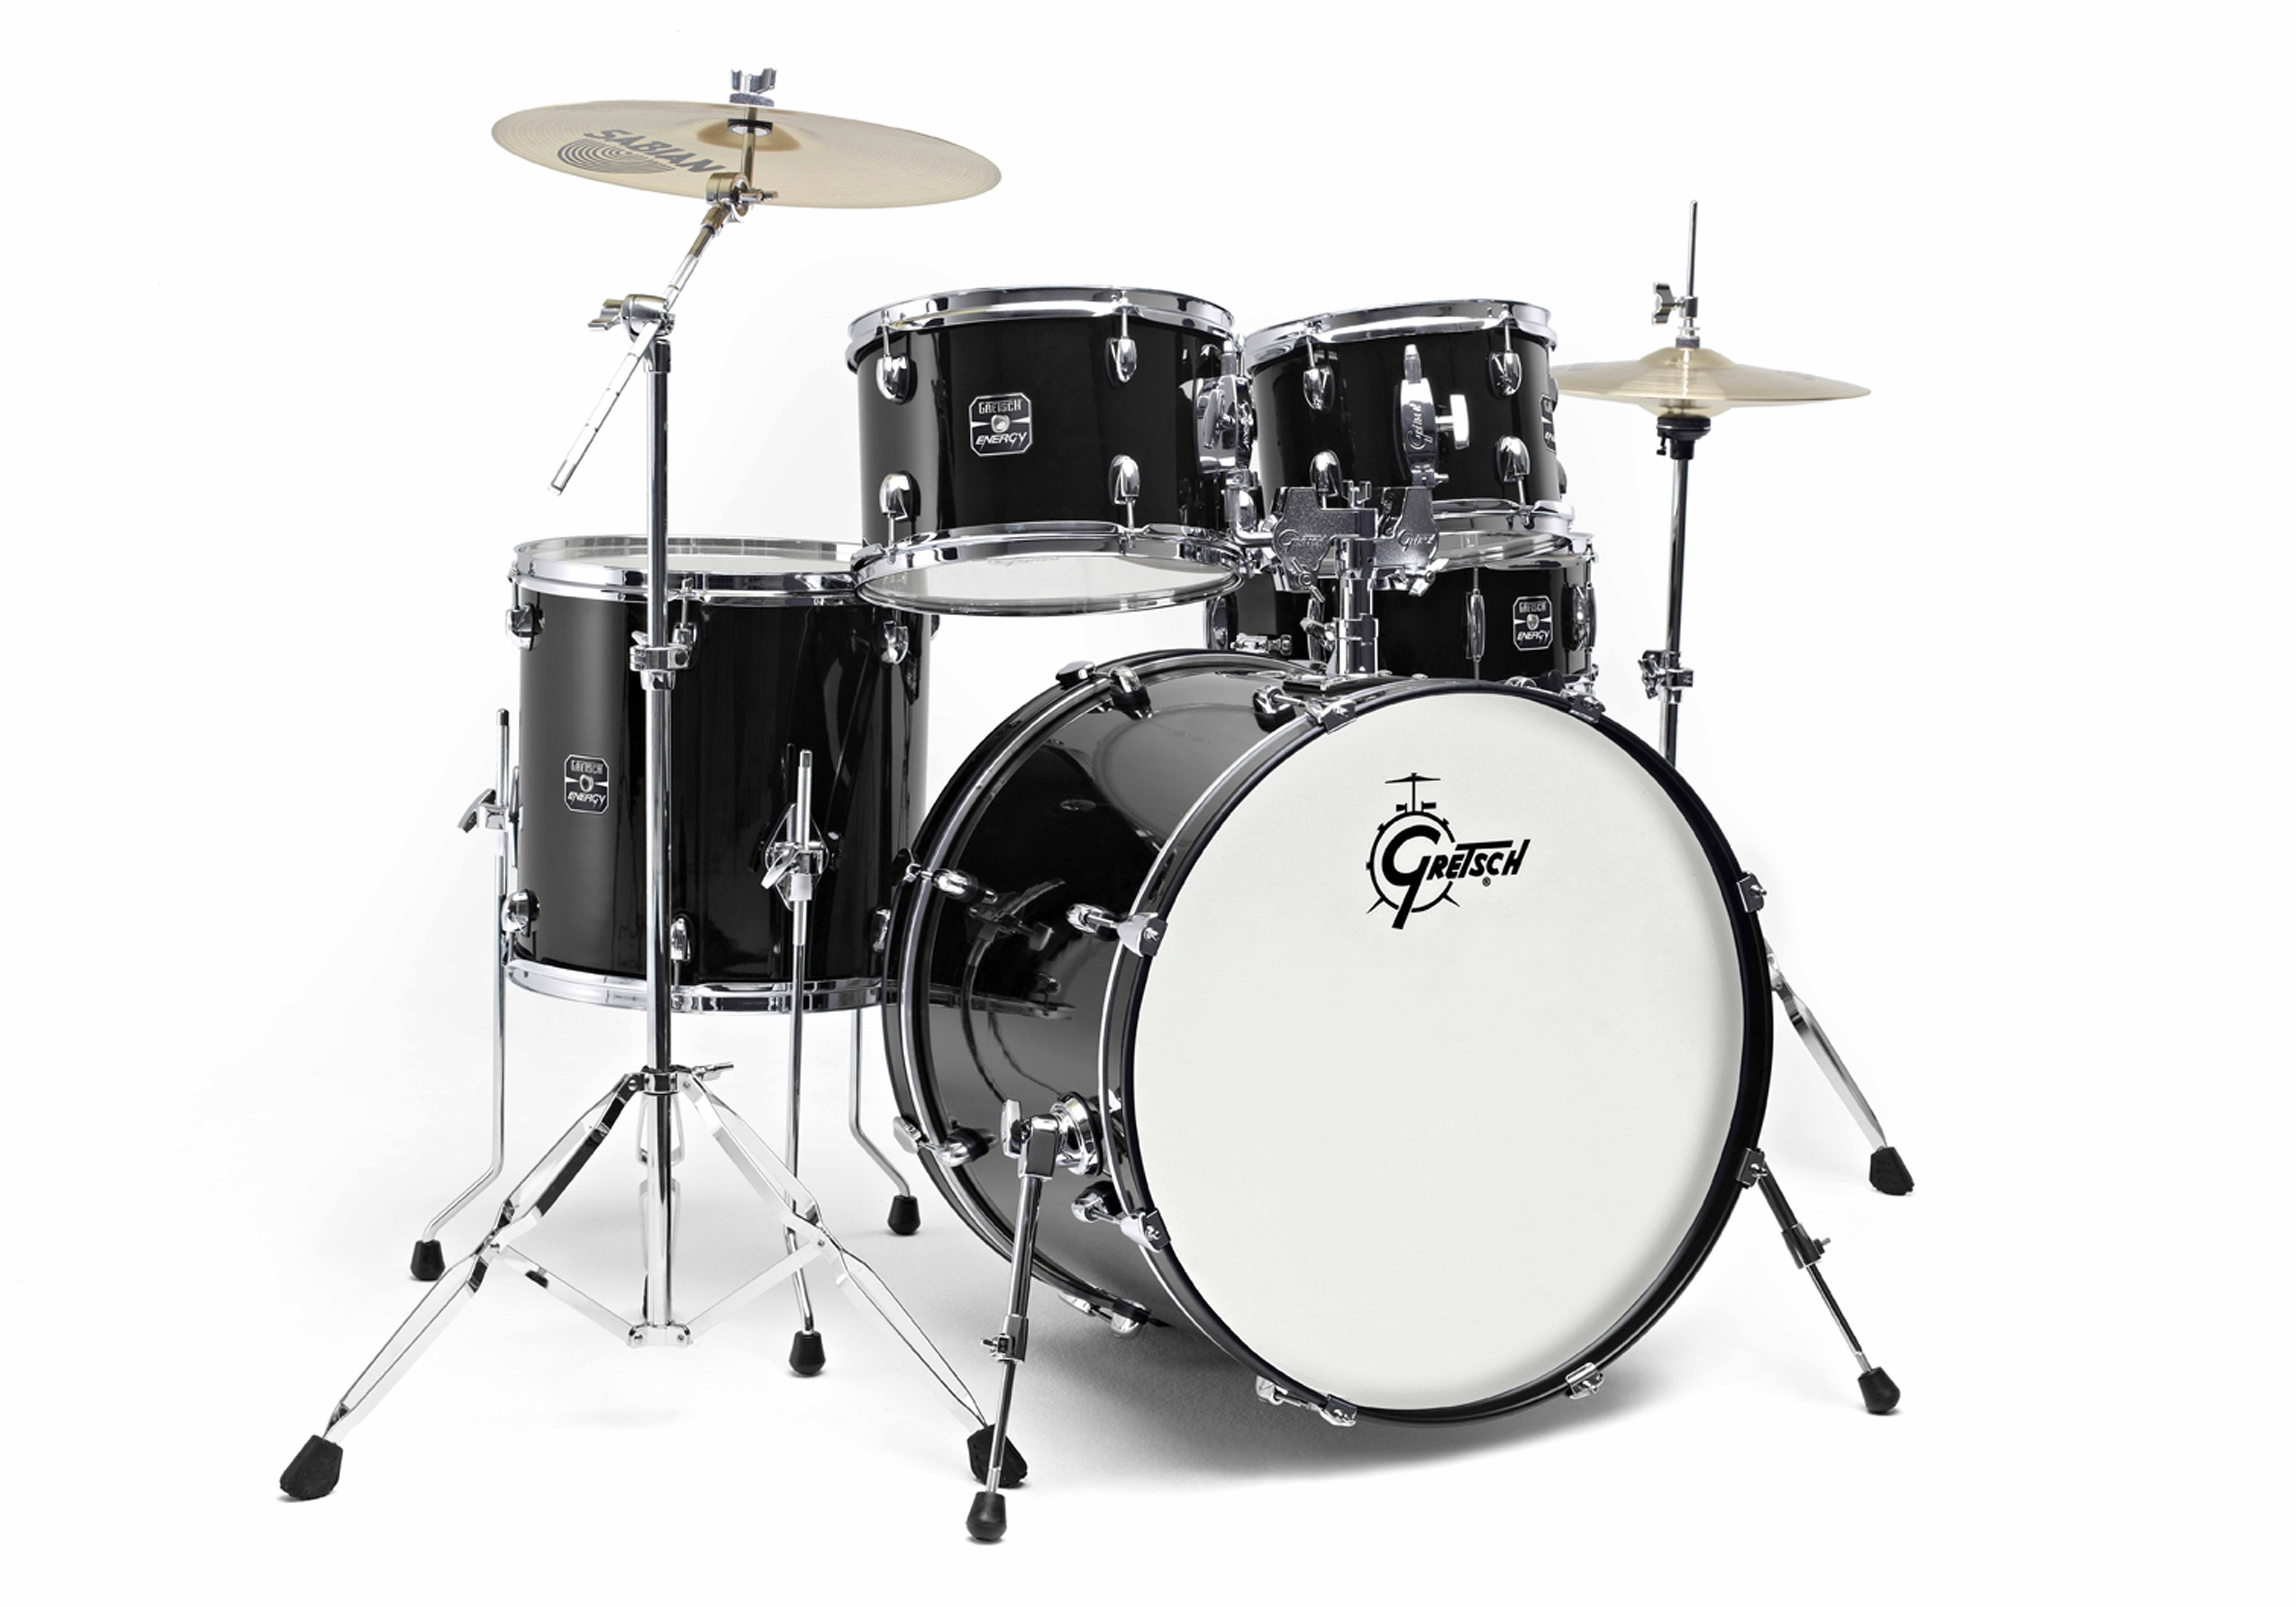 Gretsch Energy Drum Kit 
Buying Your First Drum Kit